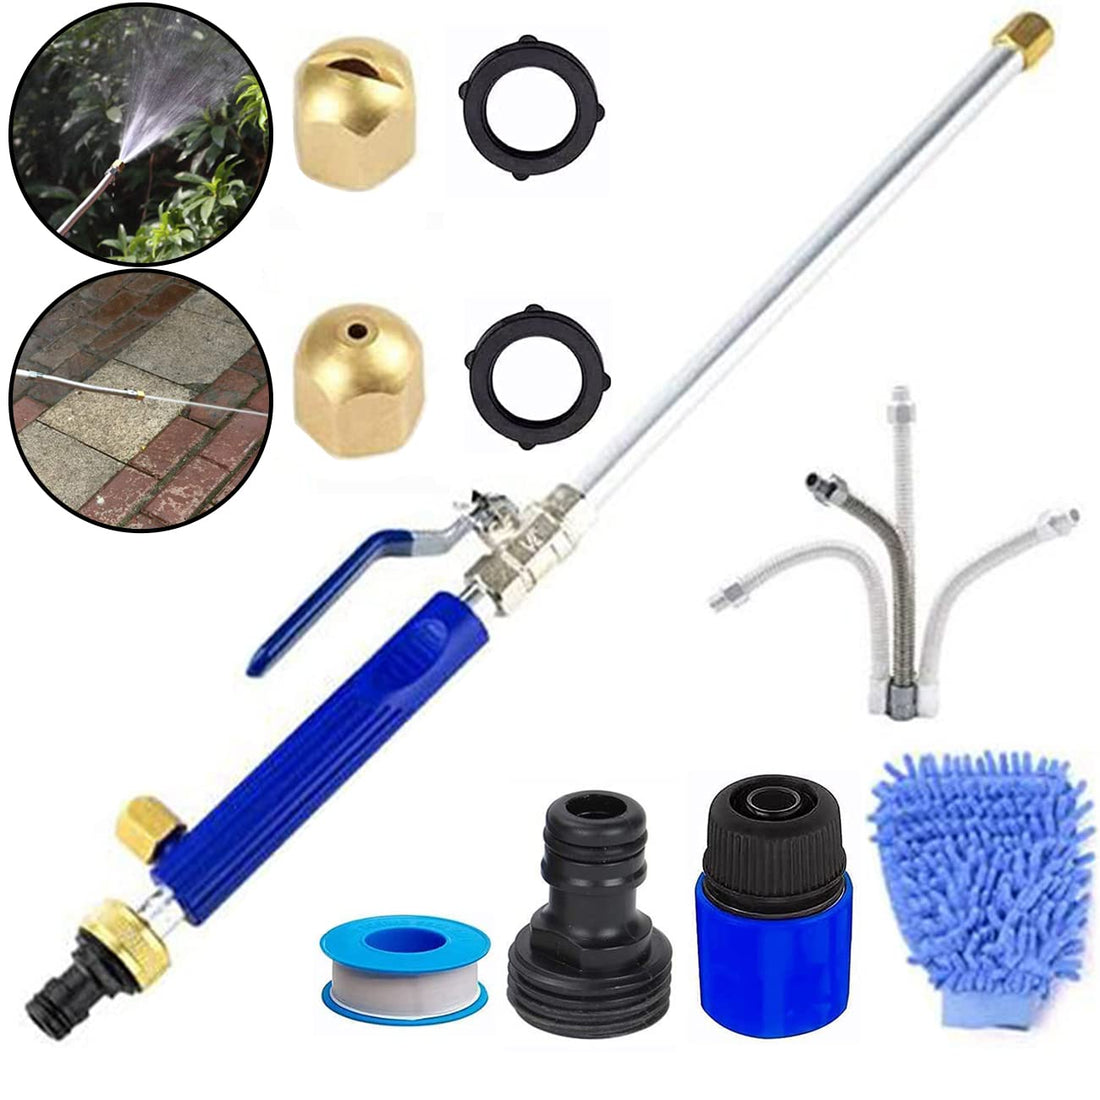 Jet Nozzle for Garden Hose Power Washer 2-in-1 High Pressure Hose Nozzle with 2 Different Nozzles and Hose Quick Connectors - Flexible Watering Sprayer Cleaning Tool